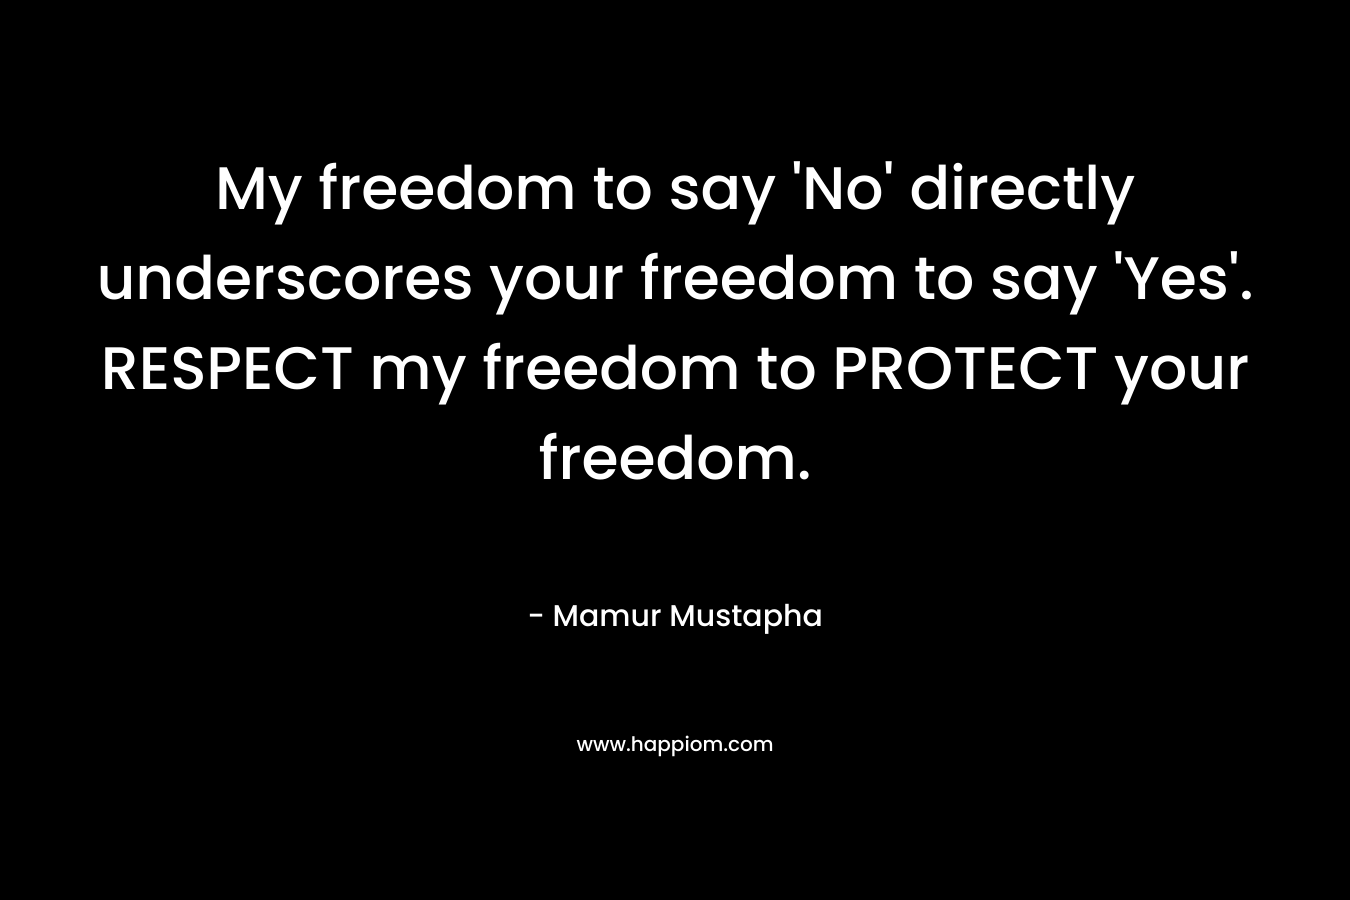 My freedom to say 'No' directly underscores your freedom to say 'Yes'. RESPECT my freedom to PROTECT your freedom.